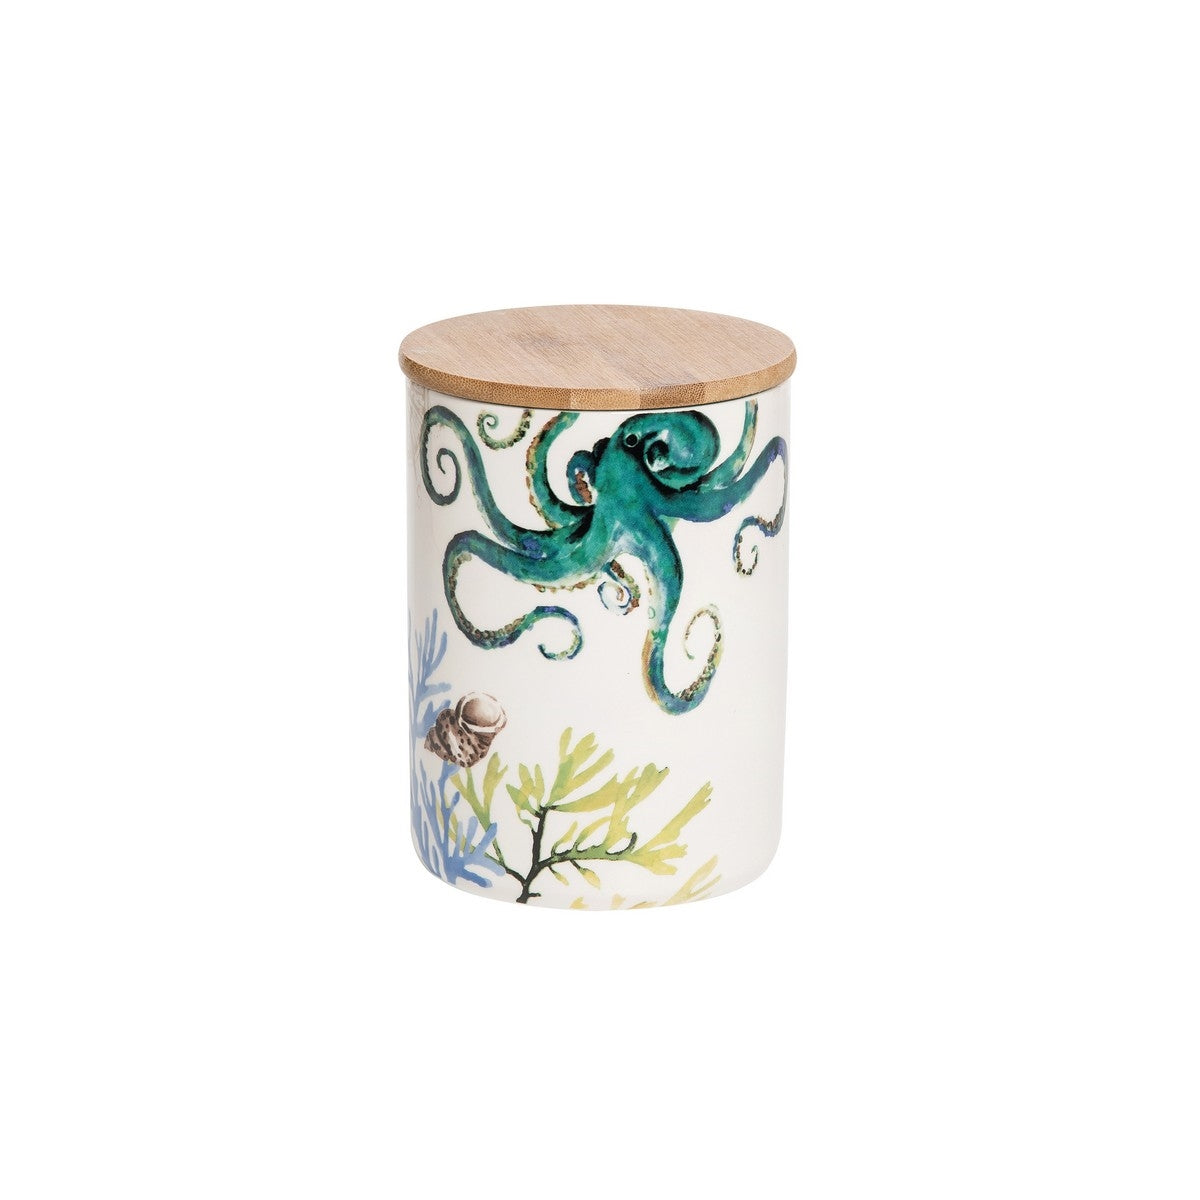 OCTOPUS CERAMIC CONTAINER WITH BAMBOO LID